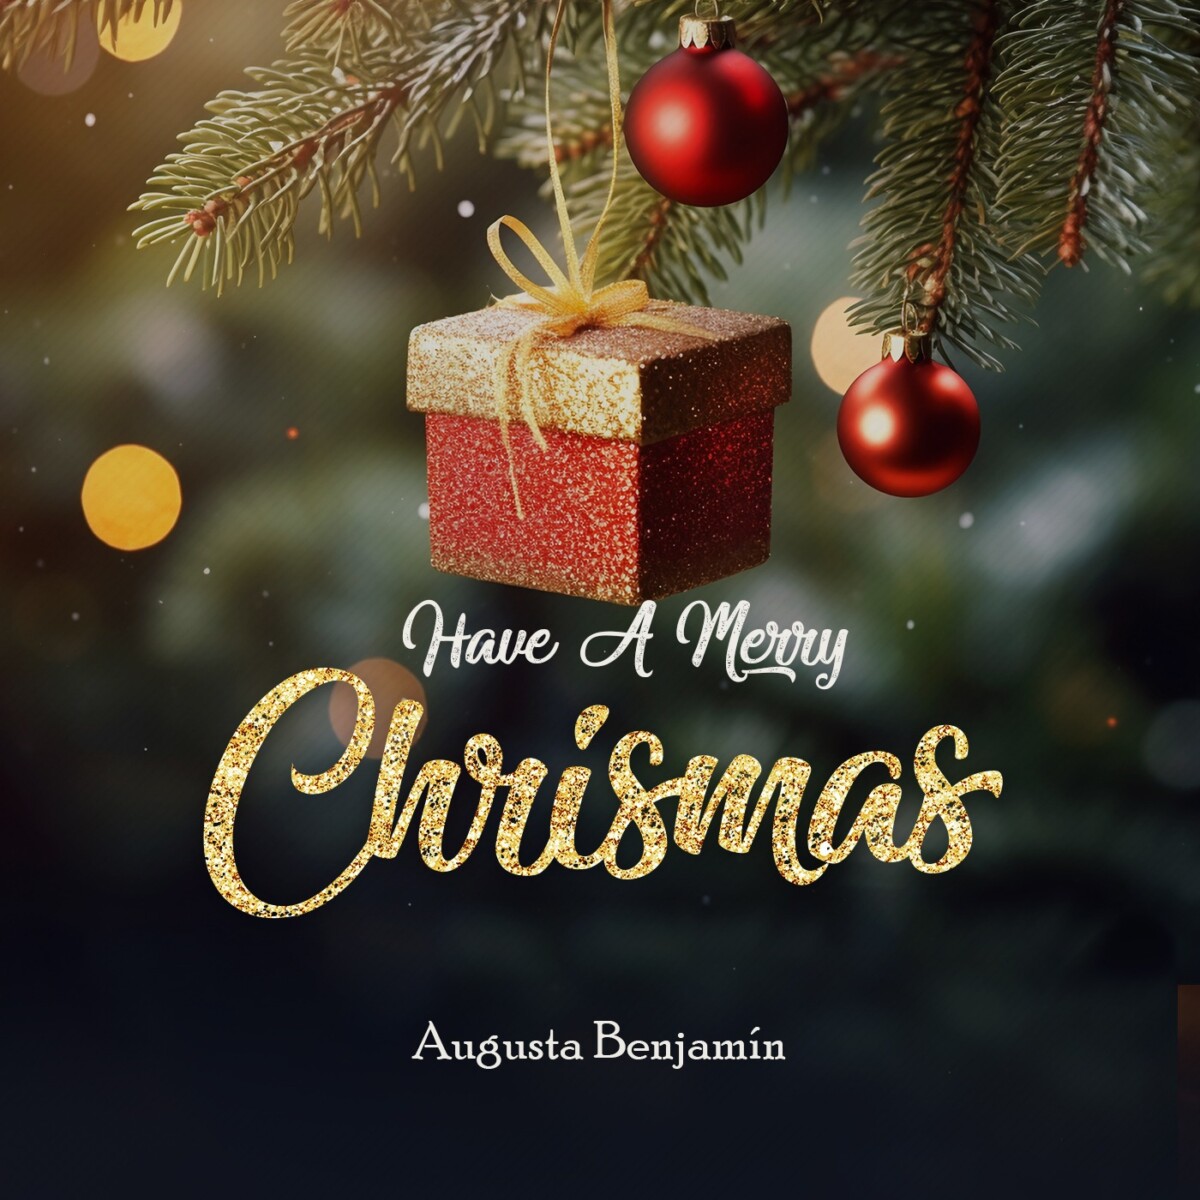 Augusta Benjamin – Have A Merry Christmas